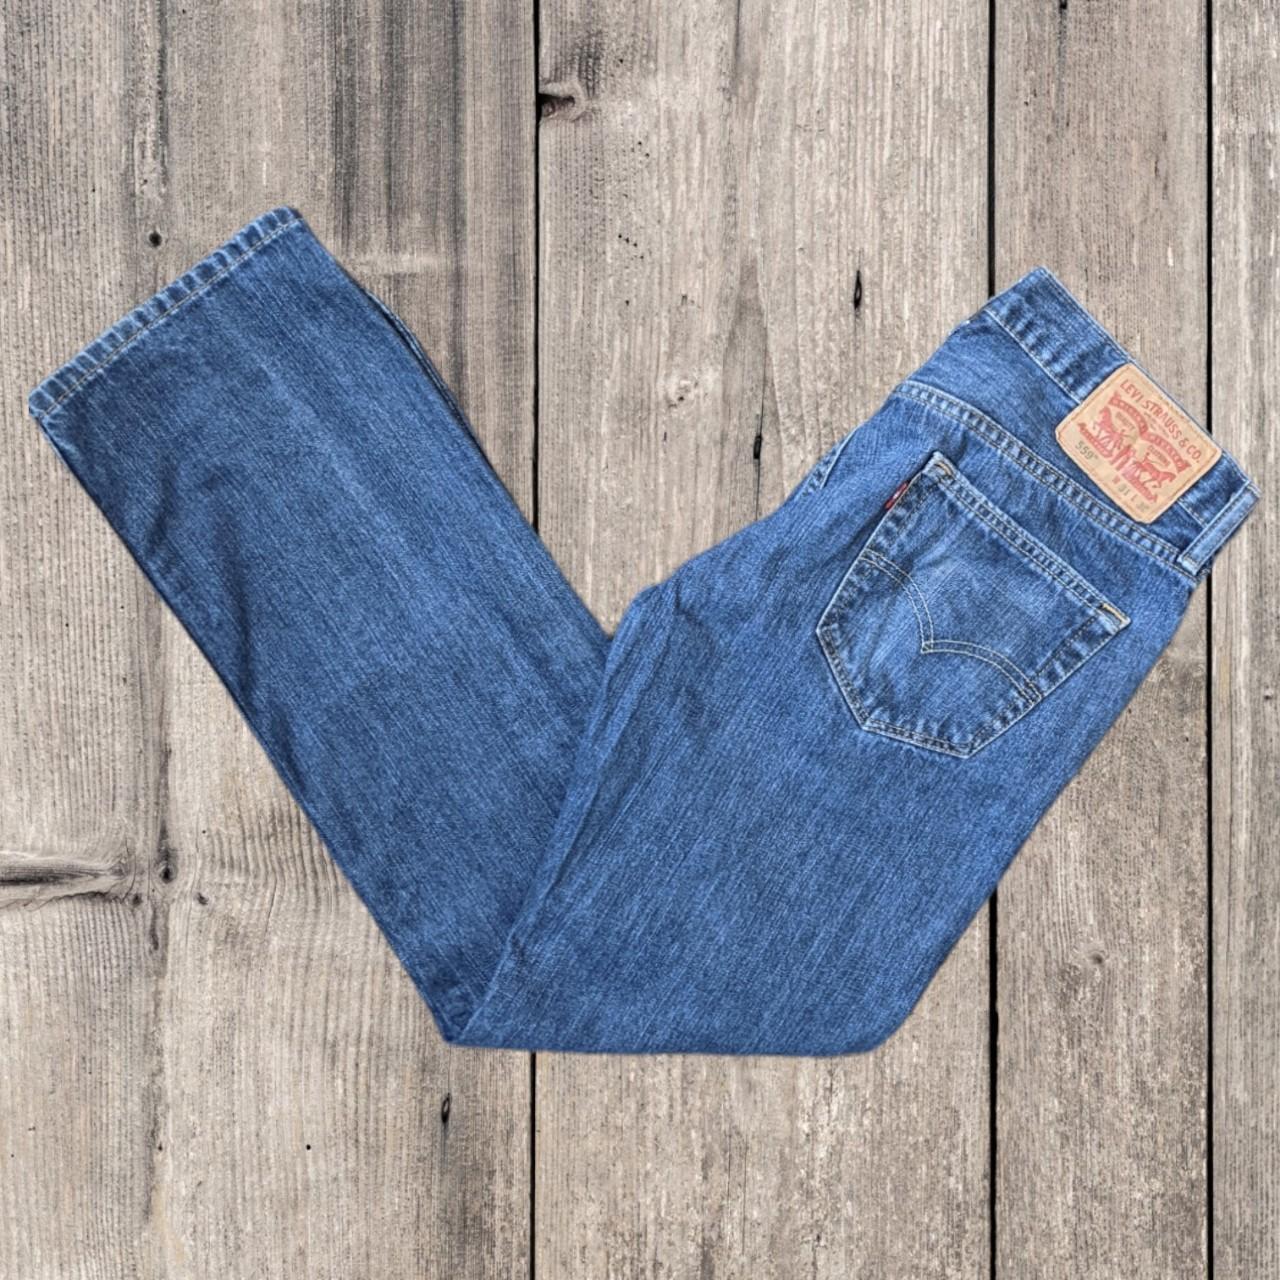 Levi's 559 relaxed straight leg jeans in a classic... - Depop